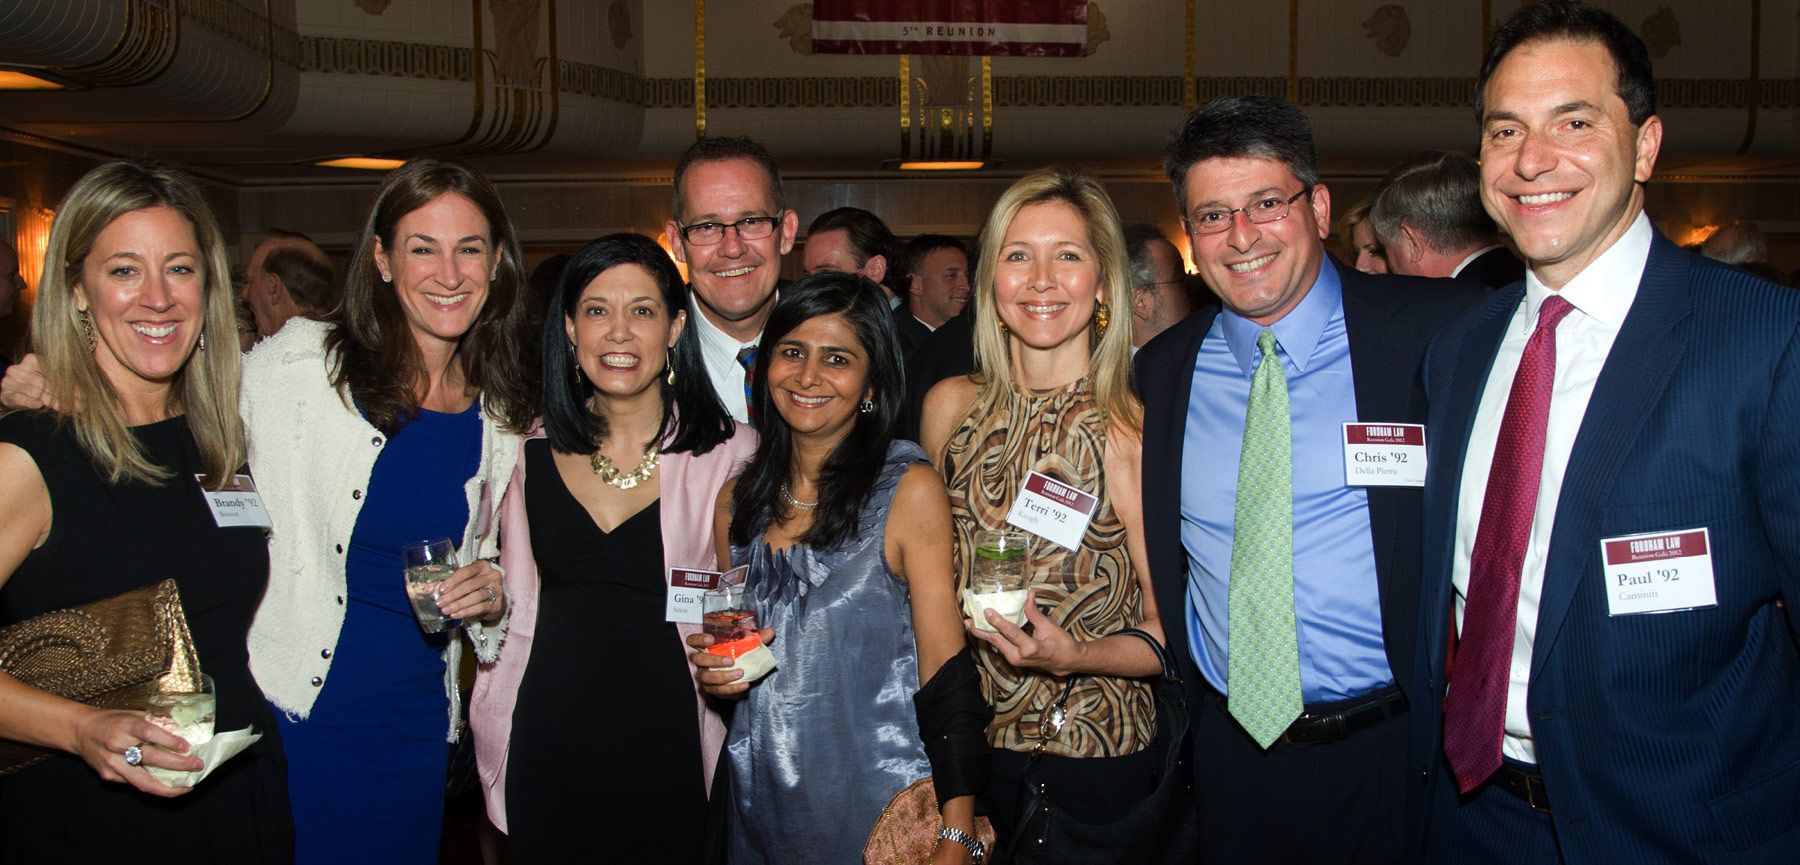 Class of 1992 at the Fordham Law Alumni Association Reunion